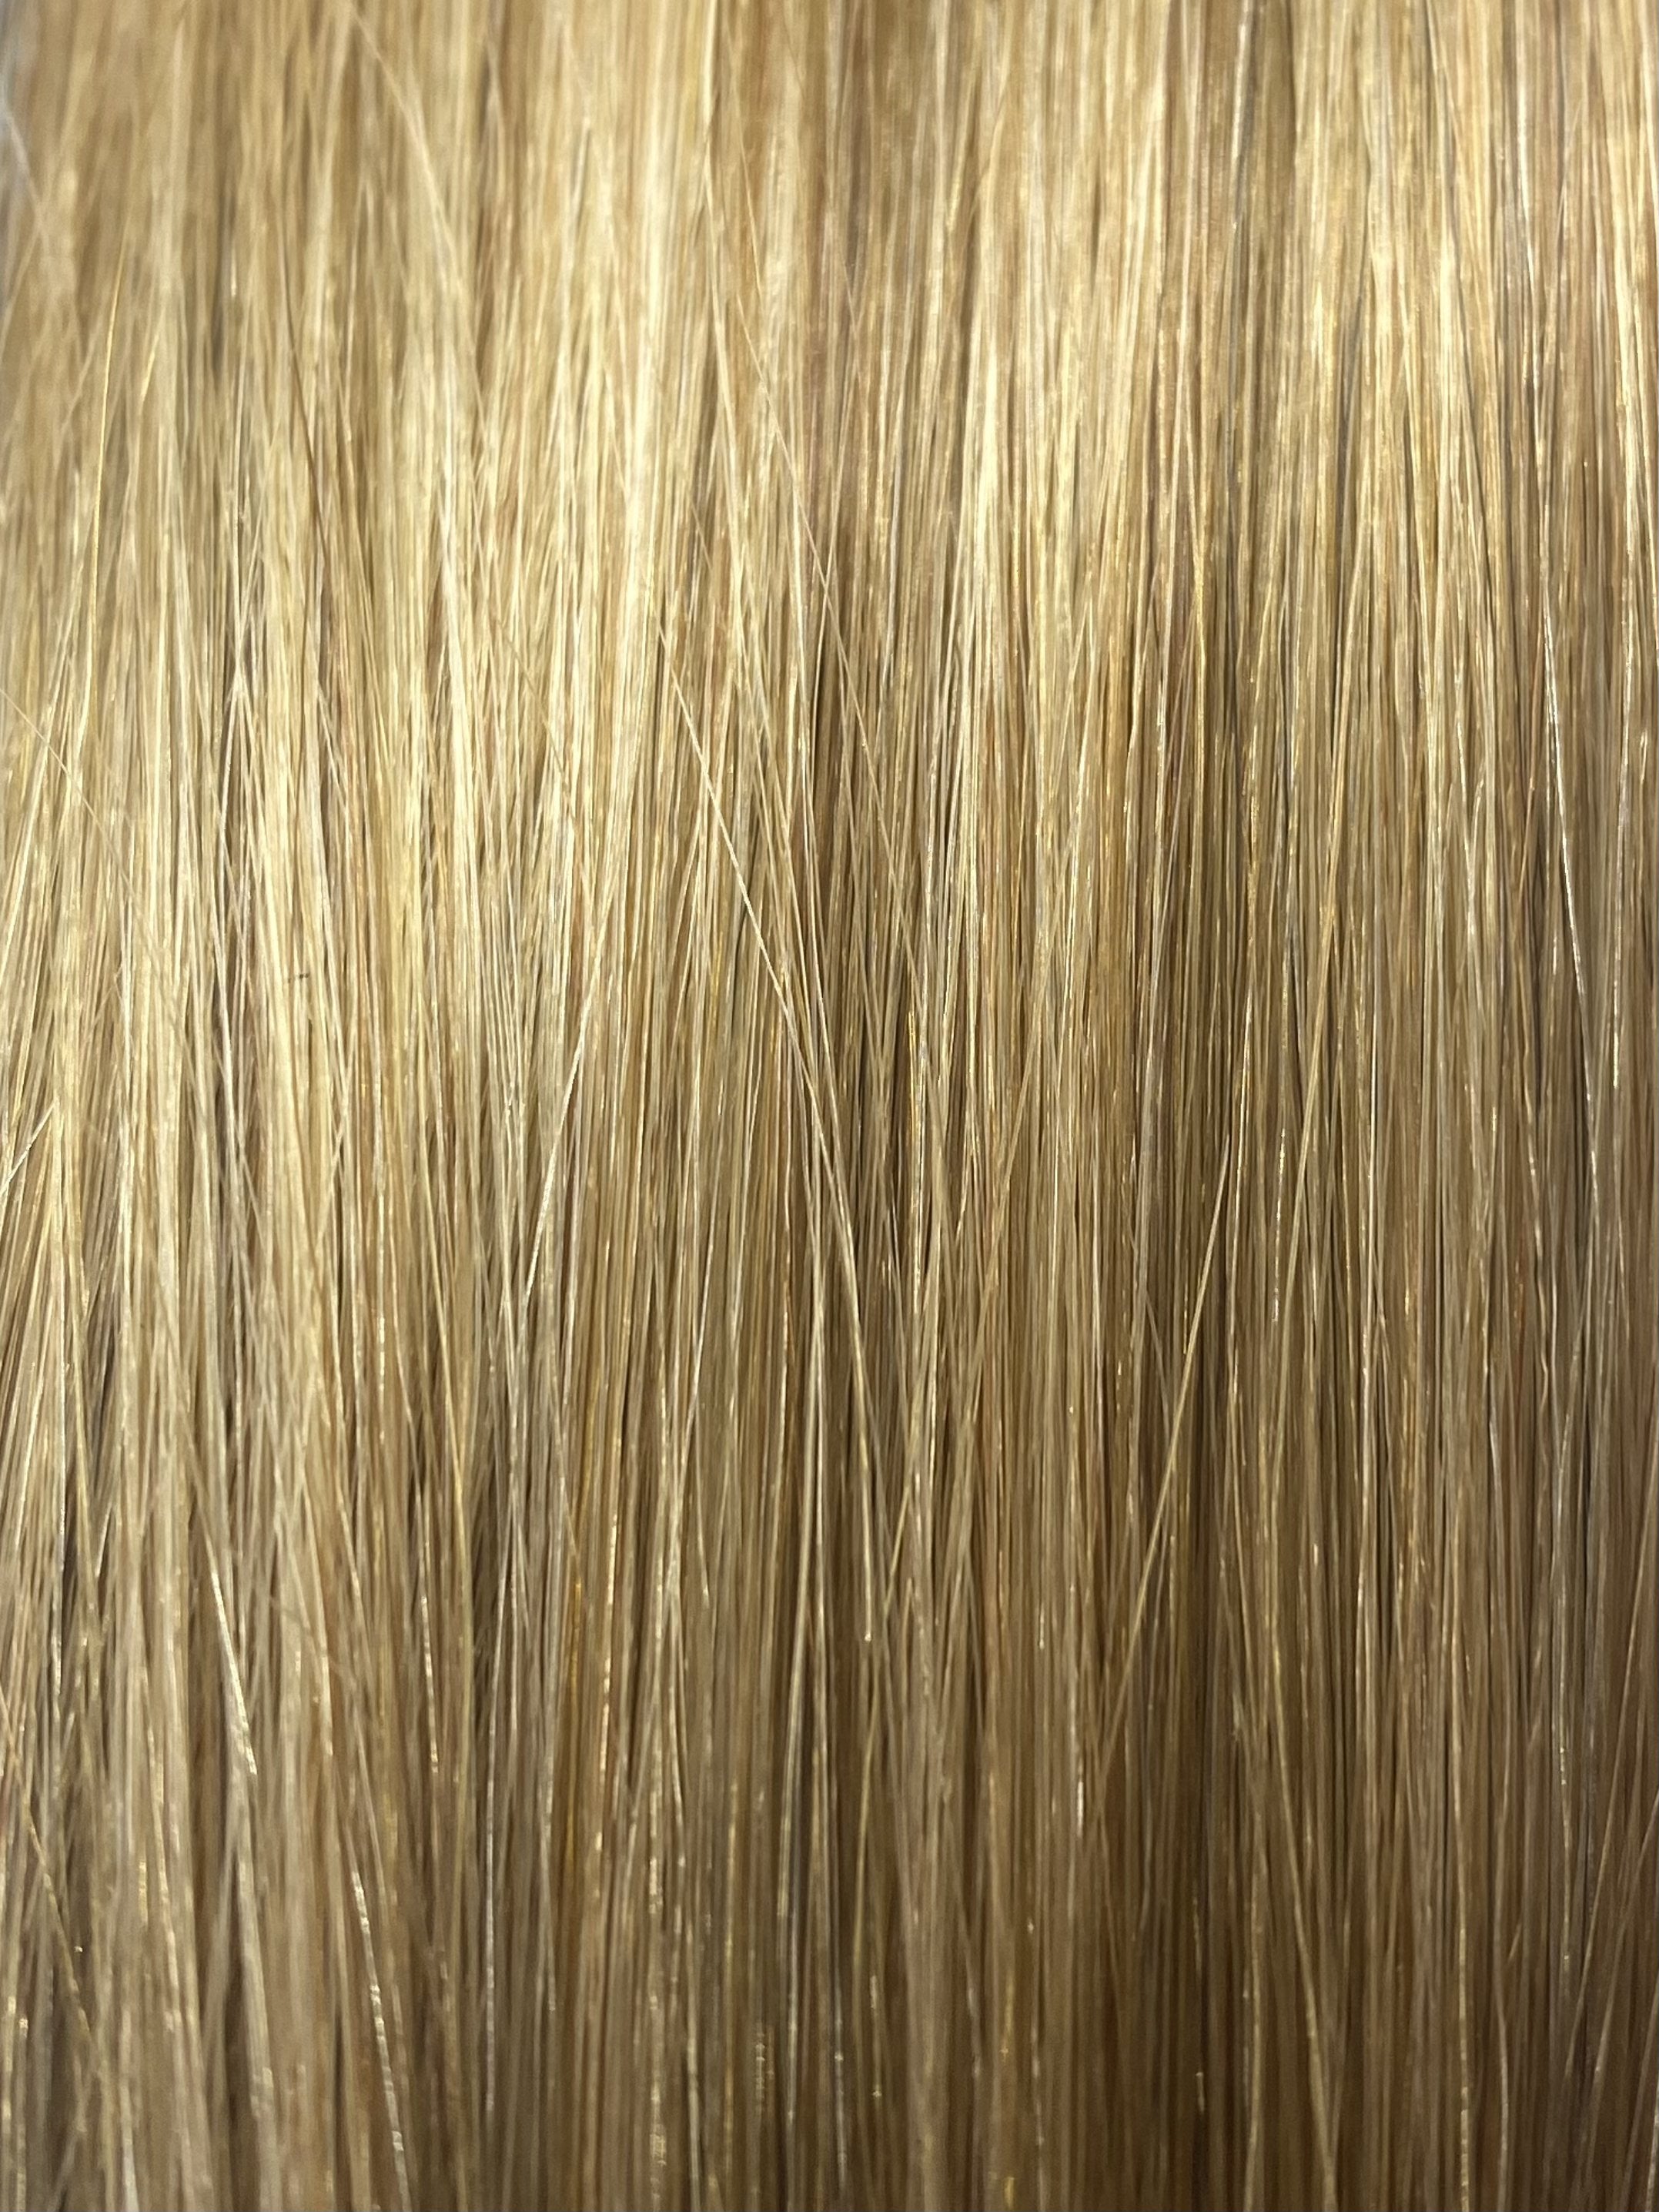 FUSION HIGHLIGHT #12/DB2 LIGHT/COPPER GOLDEN BLONDE 60CM/ 24 INCHES  -  25 GRAMS